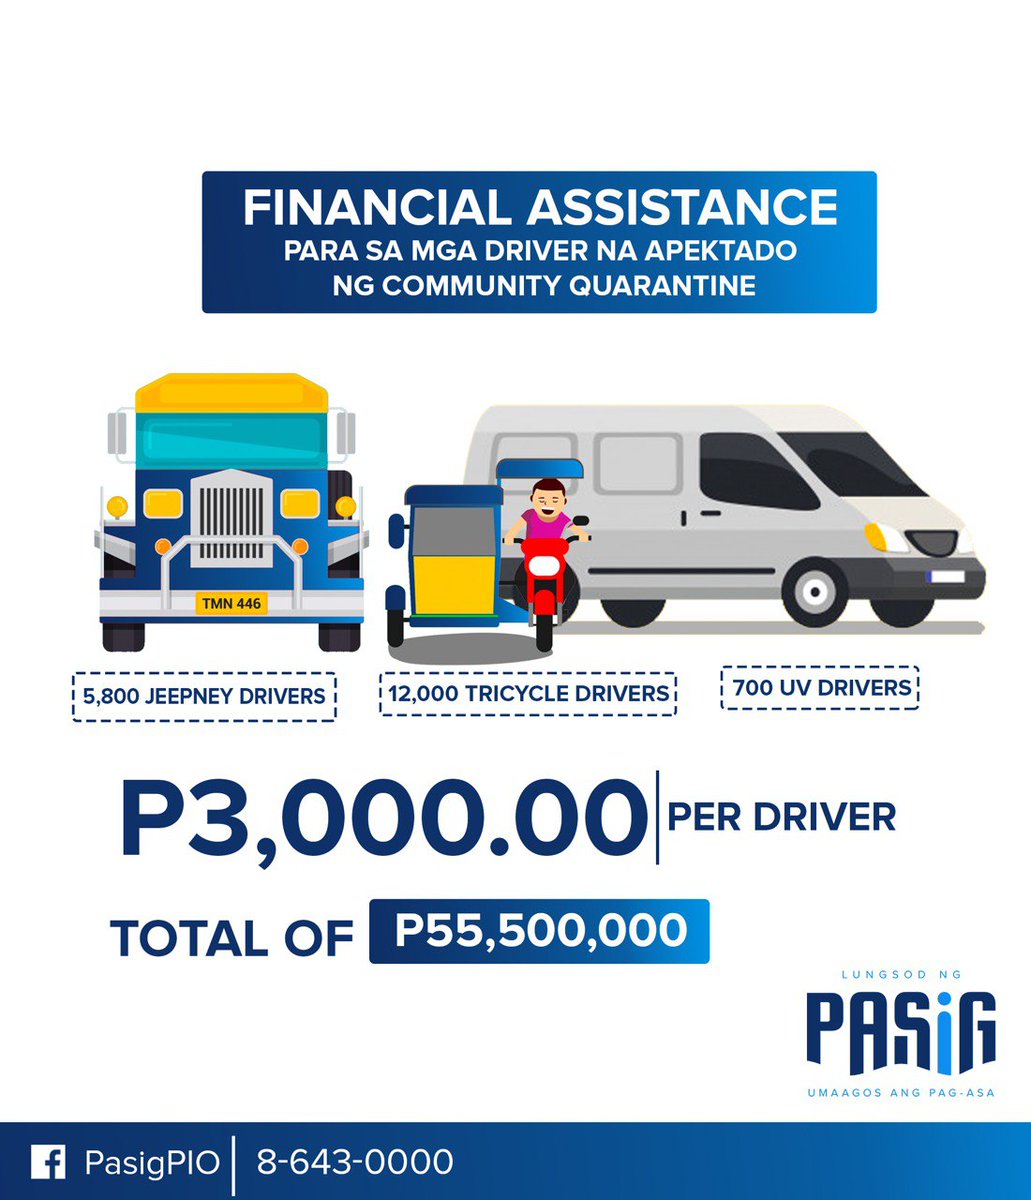 FINANCIAL ASSISTANCE FOR OUR PUBLIC TRANSPORT DRIVERS AFFECTED BY THE COMMUNITY QUARANTINE.

P3,000 each
x
(5,800 jeepney drivers + 12,000 tricycle drivers + 700 UV drivers)
=
total of 55.5M.

Distribution is by schedule, starting Monday.

#StayHome #BeatCovidTogether